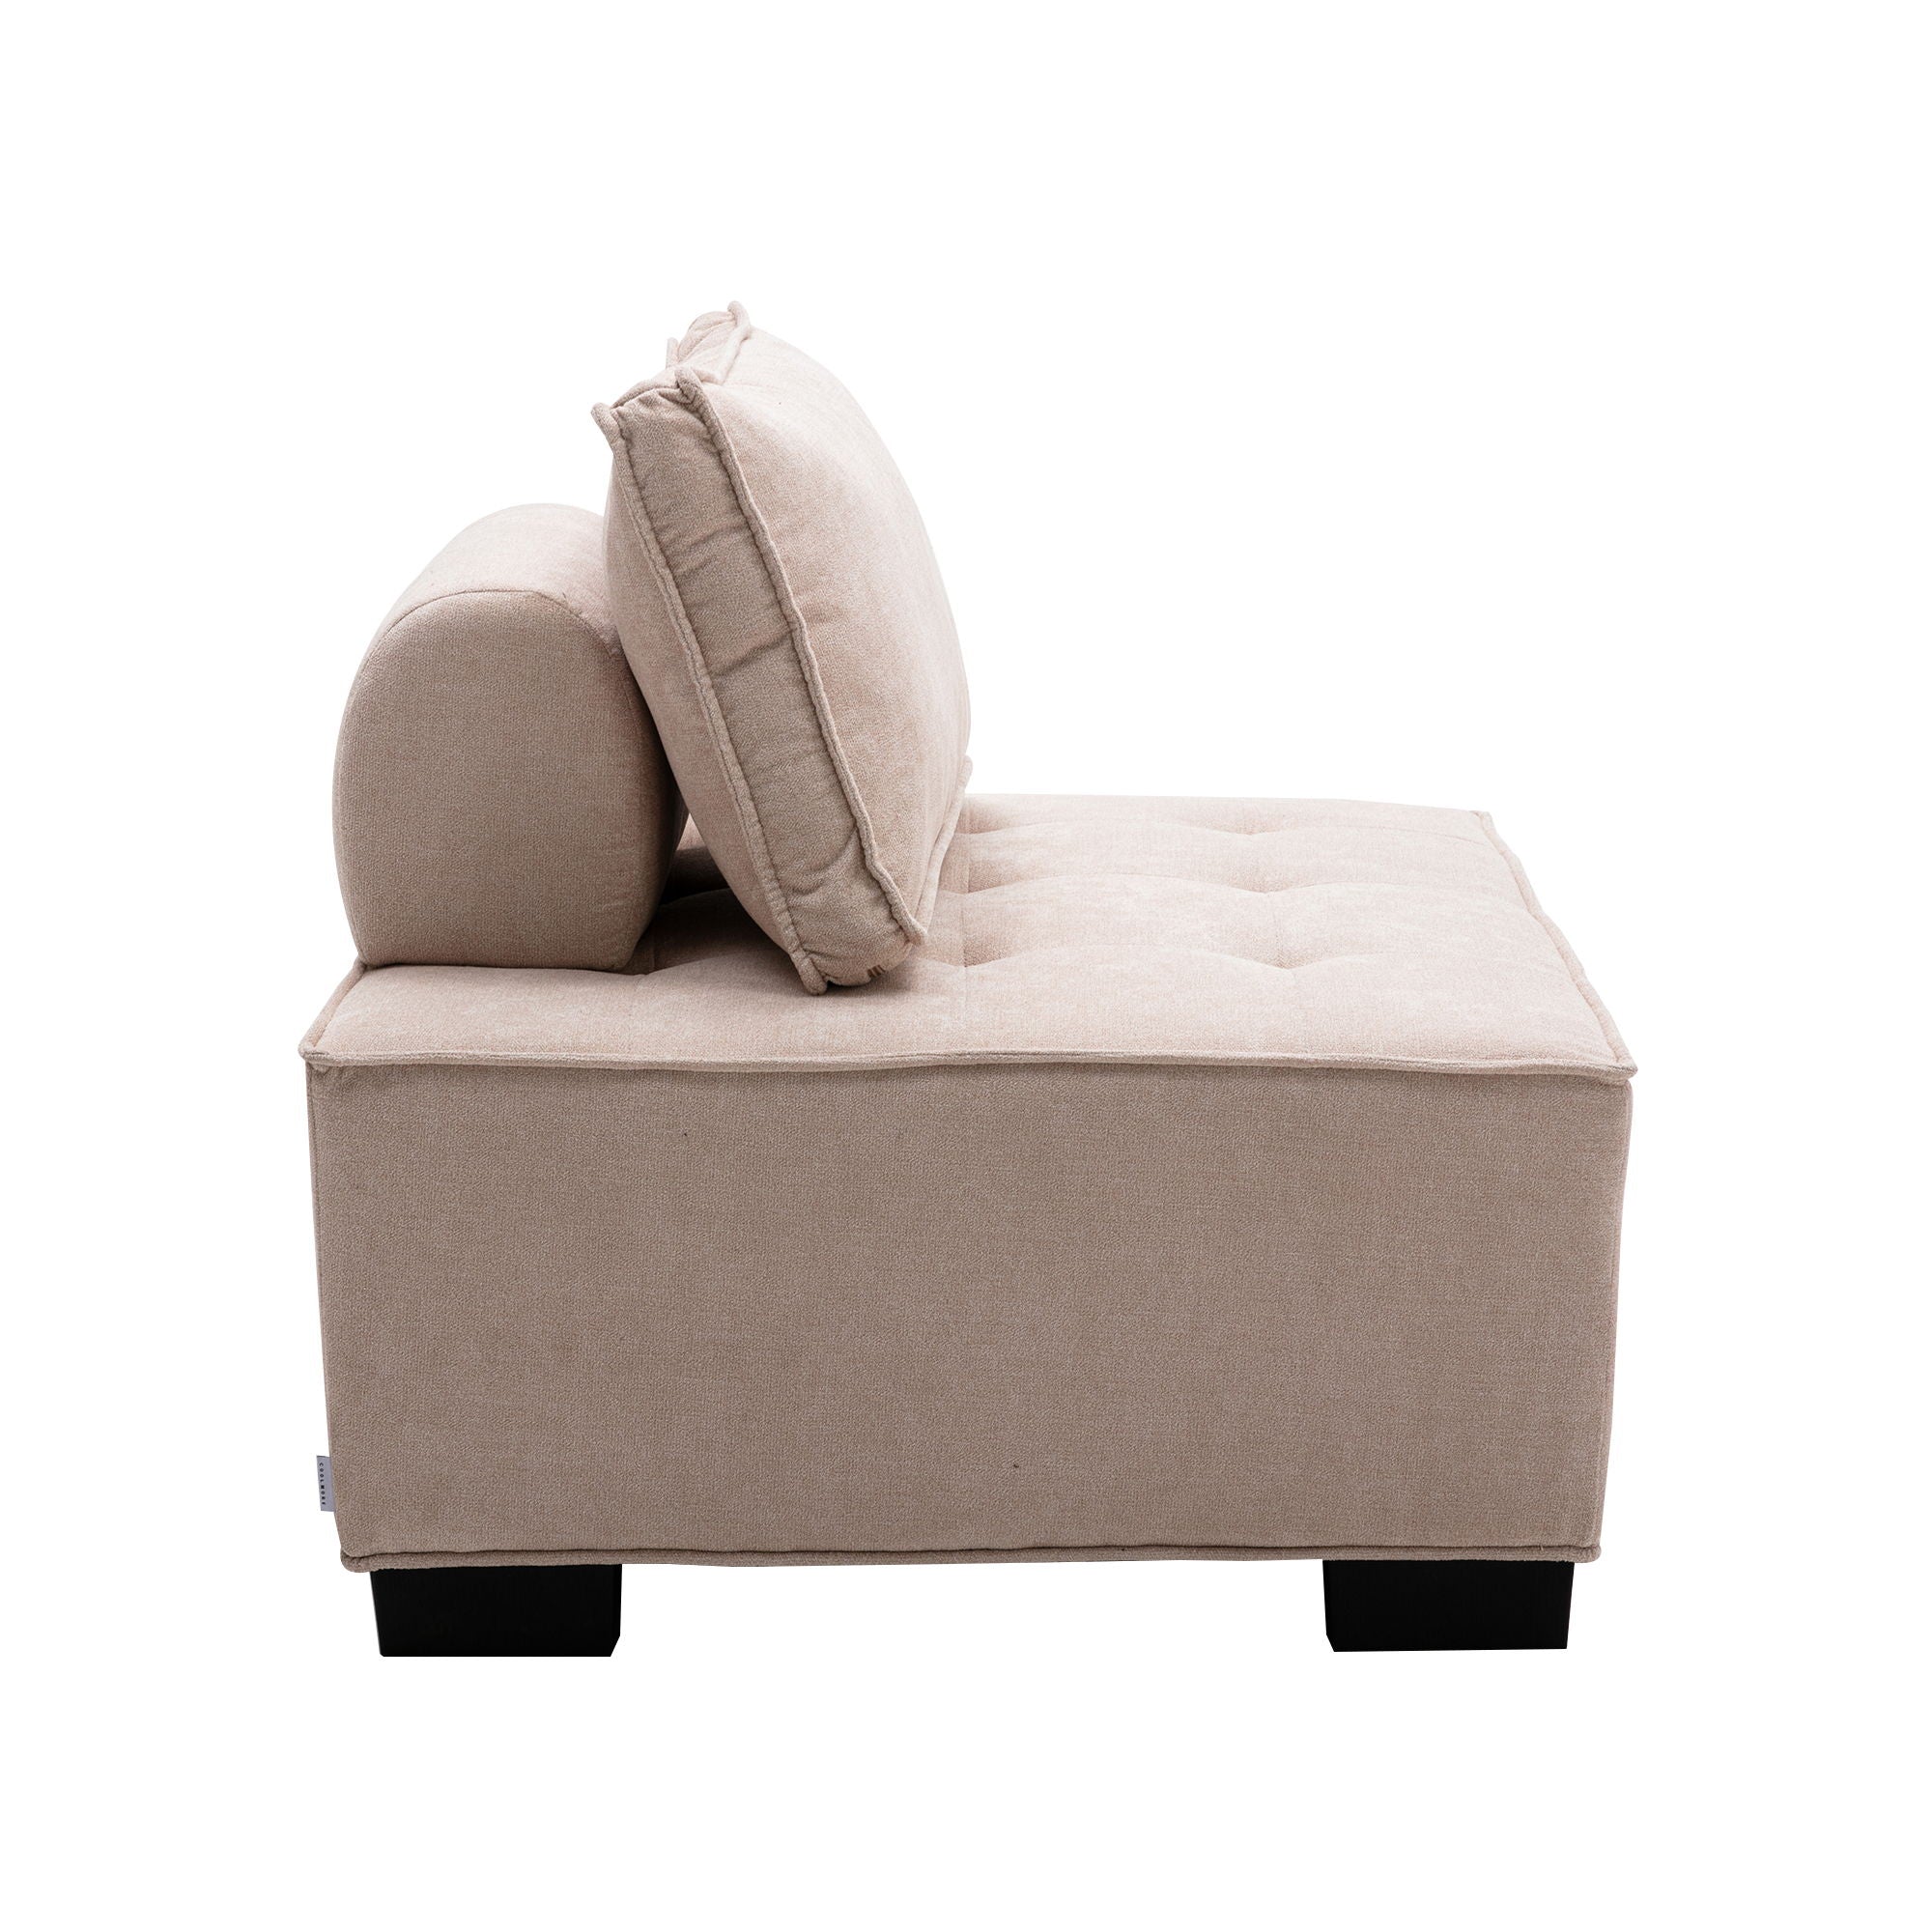 Coomore Ottoman / Lazy Chair - Beige